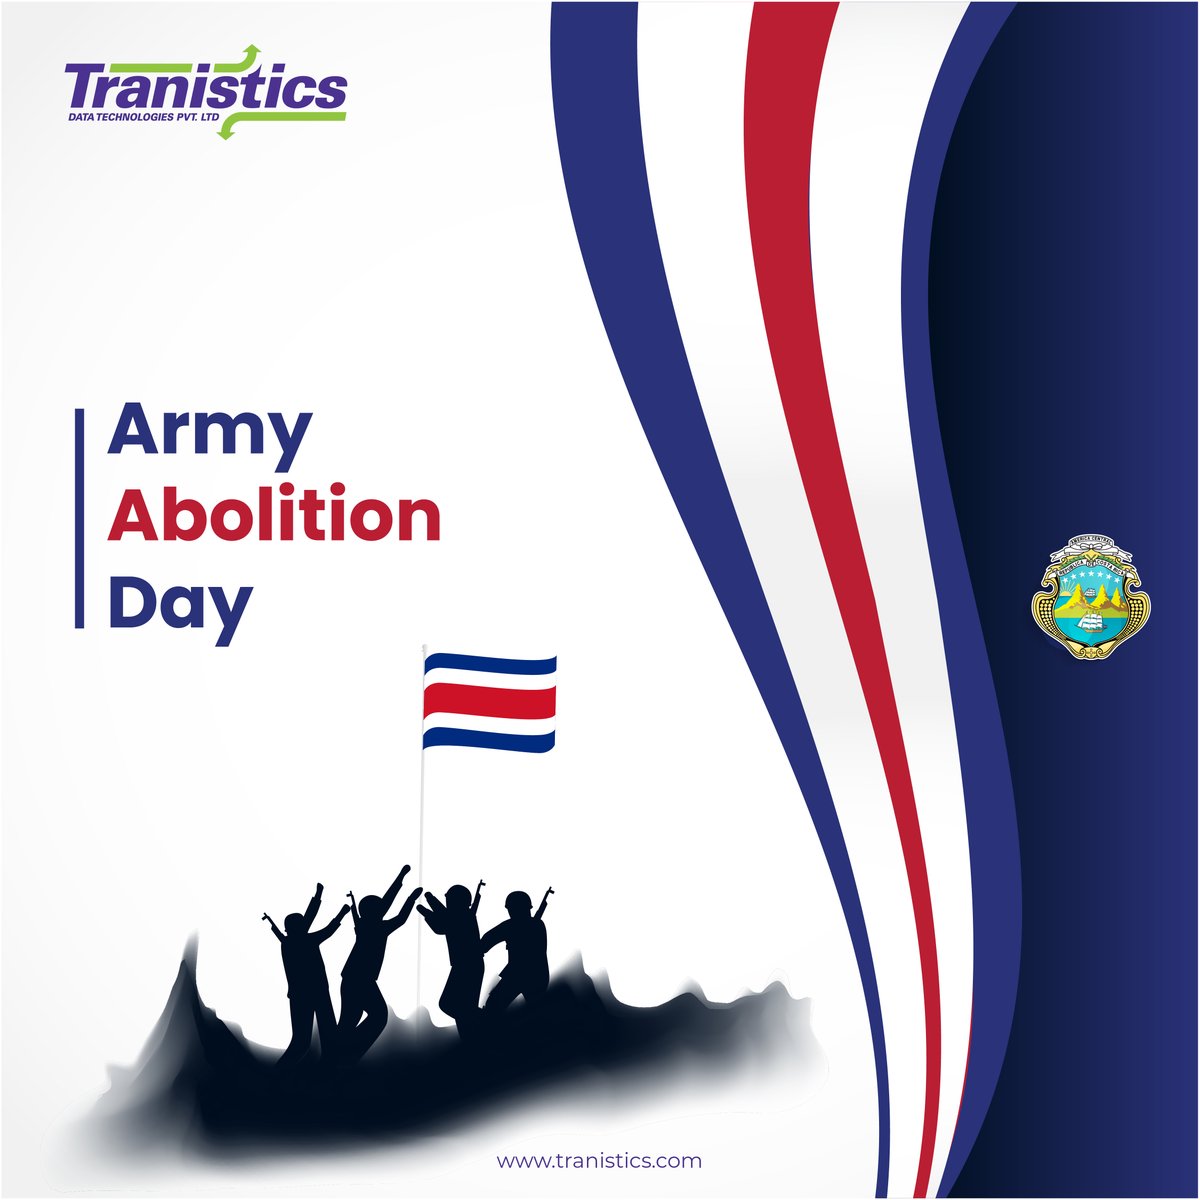 Today we celebrate Army Abolition Day! Join us in Costa Rica to honor this special holiday and show appreciation for the commitment to peaceful solutions over armed conflict.
 #armyabolitionday #costarica #tranistics #trustedbusinesspartner #logistics #publishing